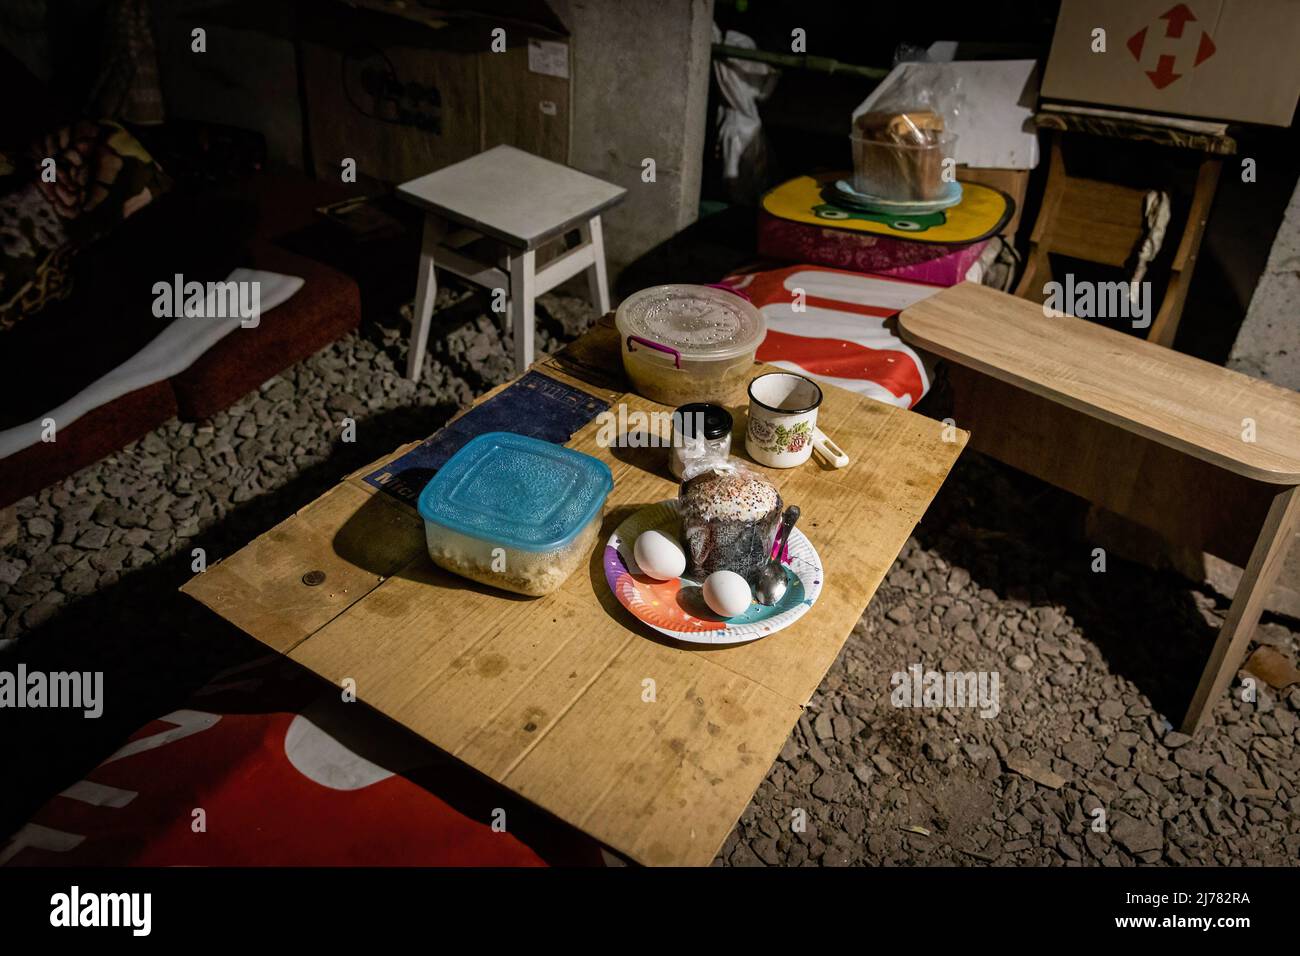 An Easter cupcake and food are seen on a table in a underground bunker in southeastern Kharkiv. Citizens in Kharkiv have been forced to adopt a new life underground in bunkers without electricity and water, as the second biggest city in Ukraine now faces under constant threat of Russian bombardment and airstrikes. (Photo by Alex Chan Tsz Yuk / SOPA Images/Sipa USA) Stock Photo